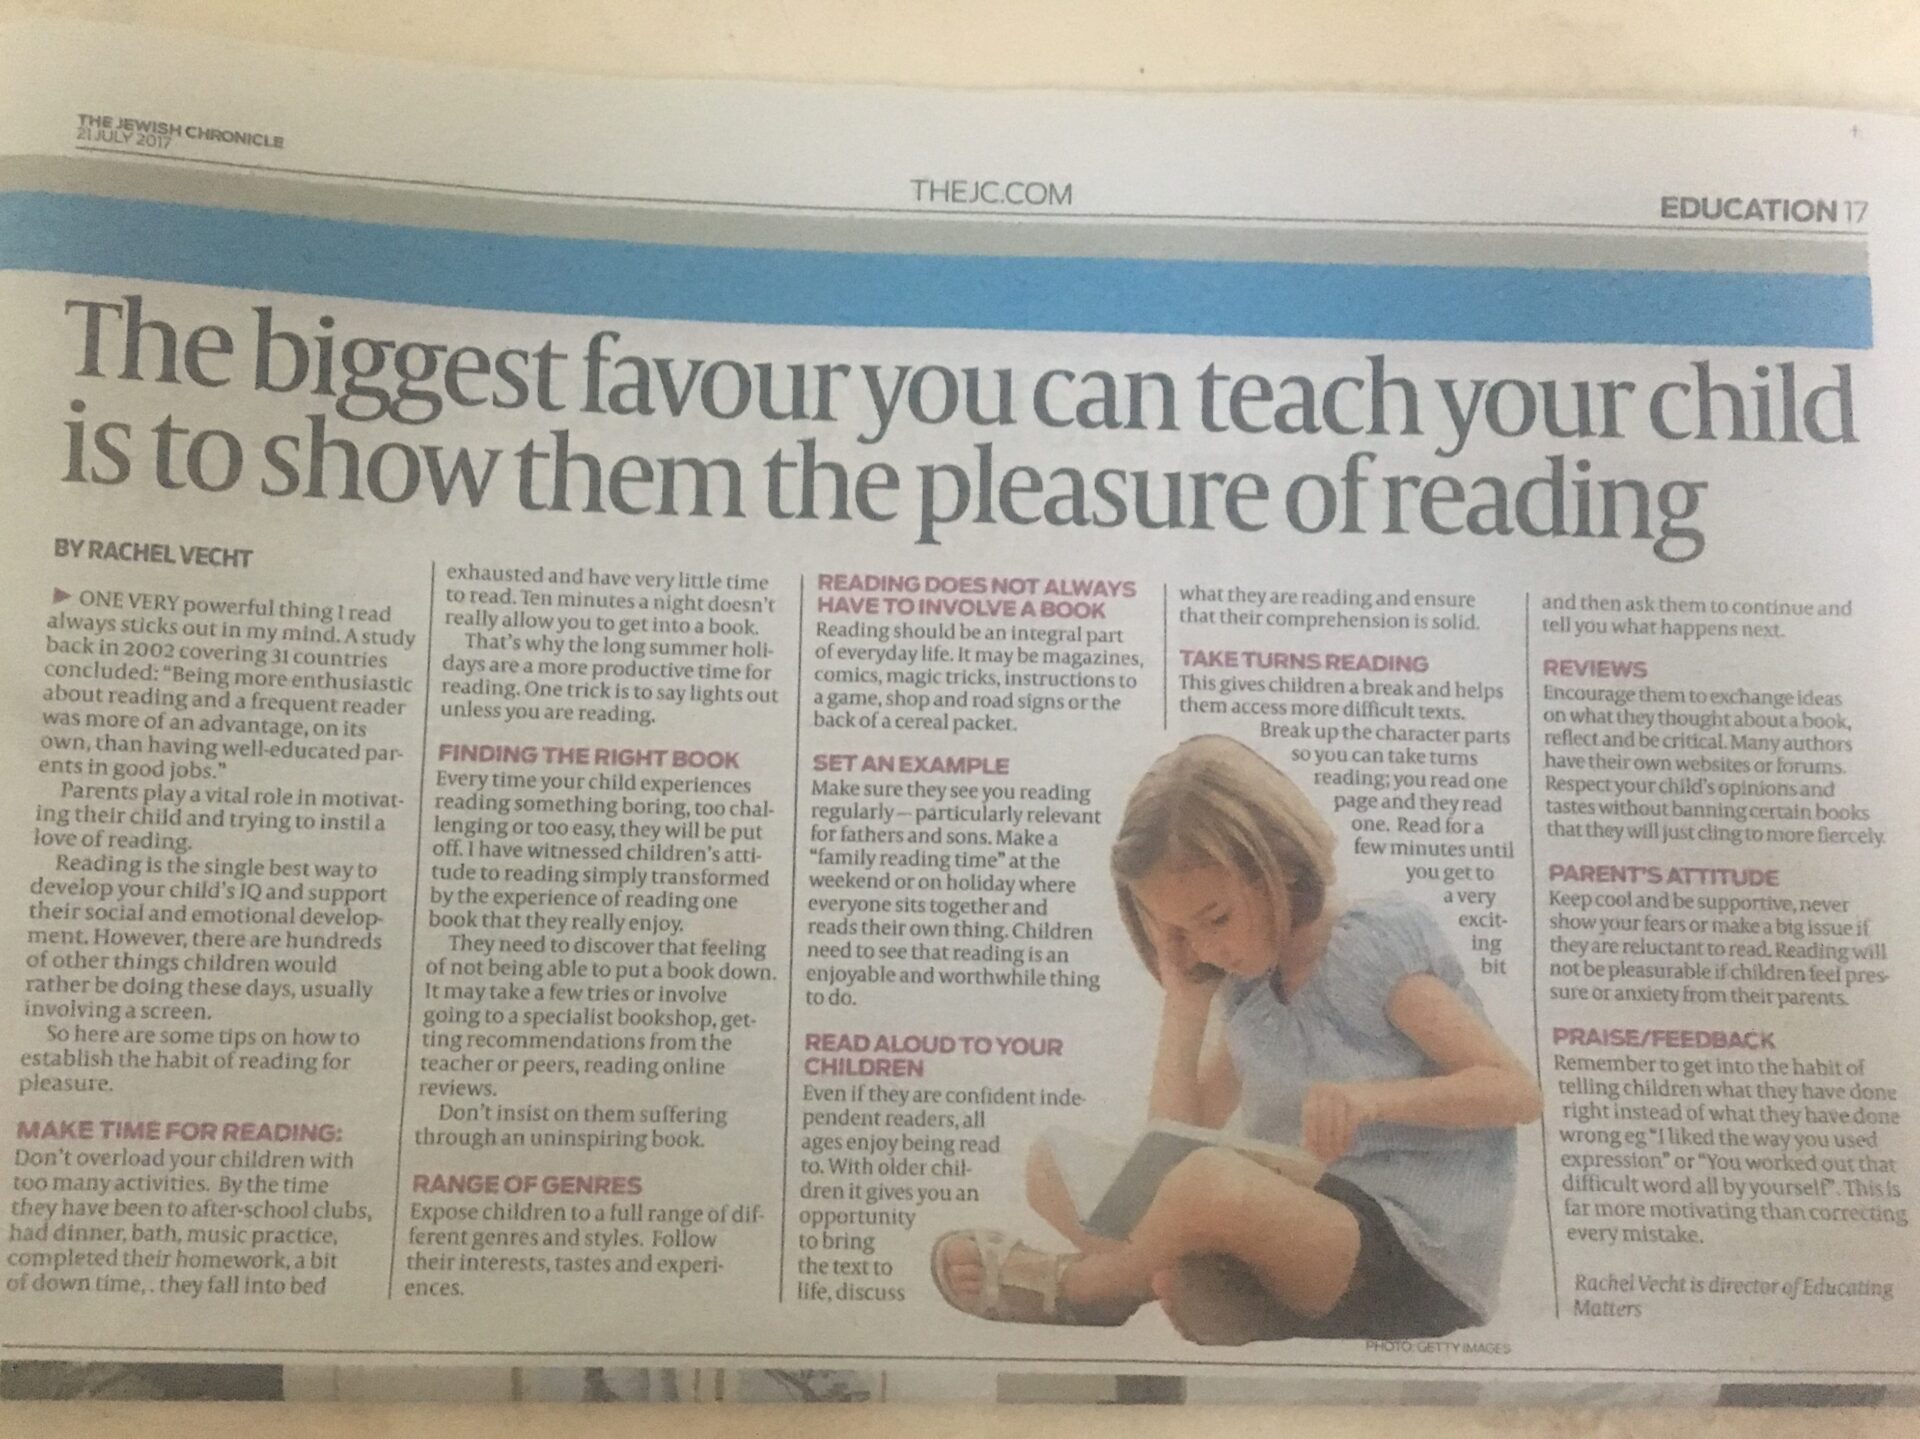 Creating the habit of reading for pleasure